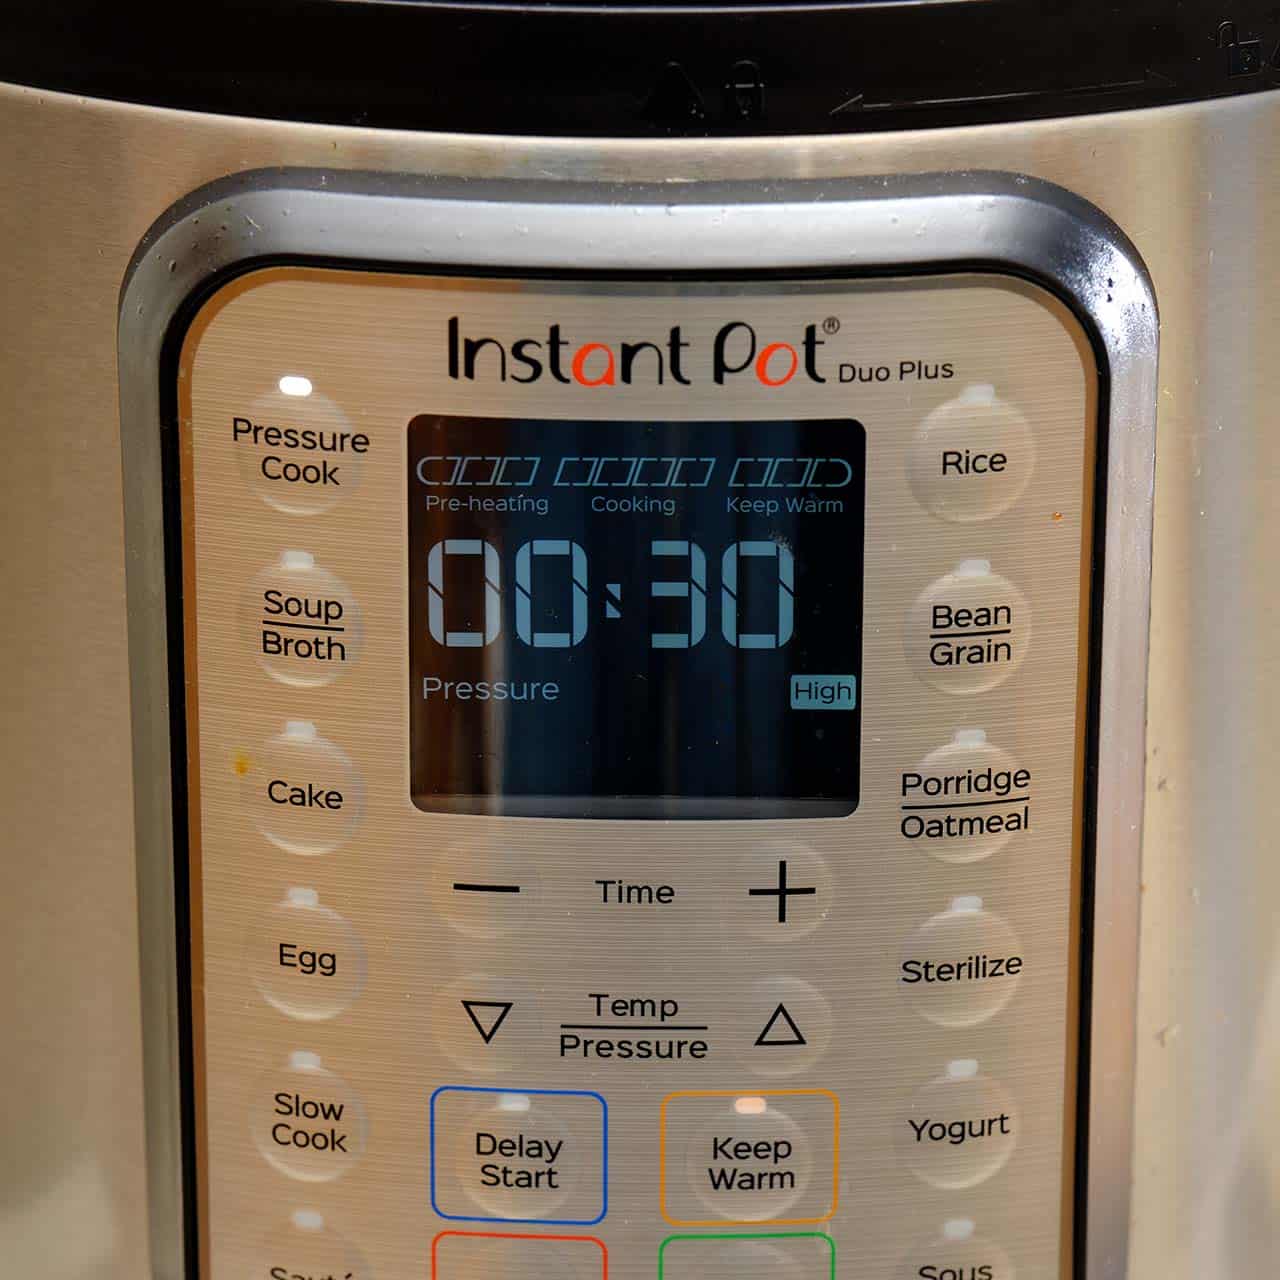 An Instant Pot set to pressure cook for 30 minutes